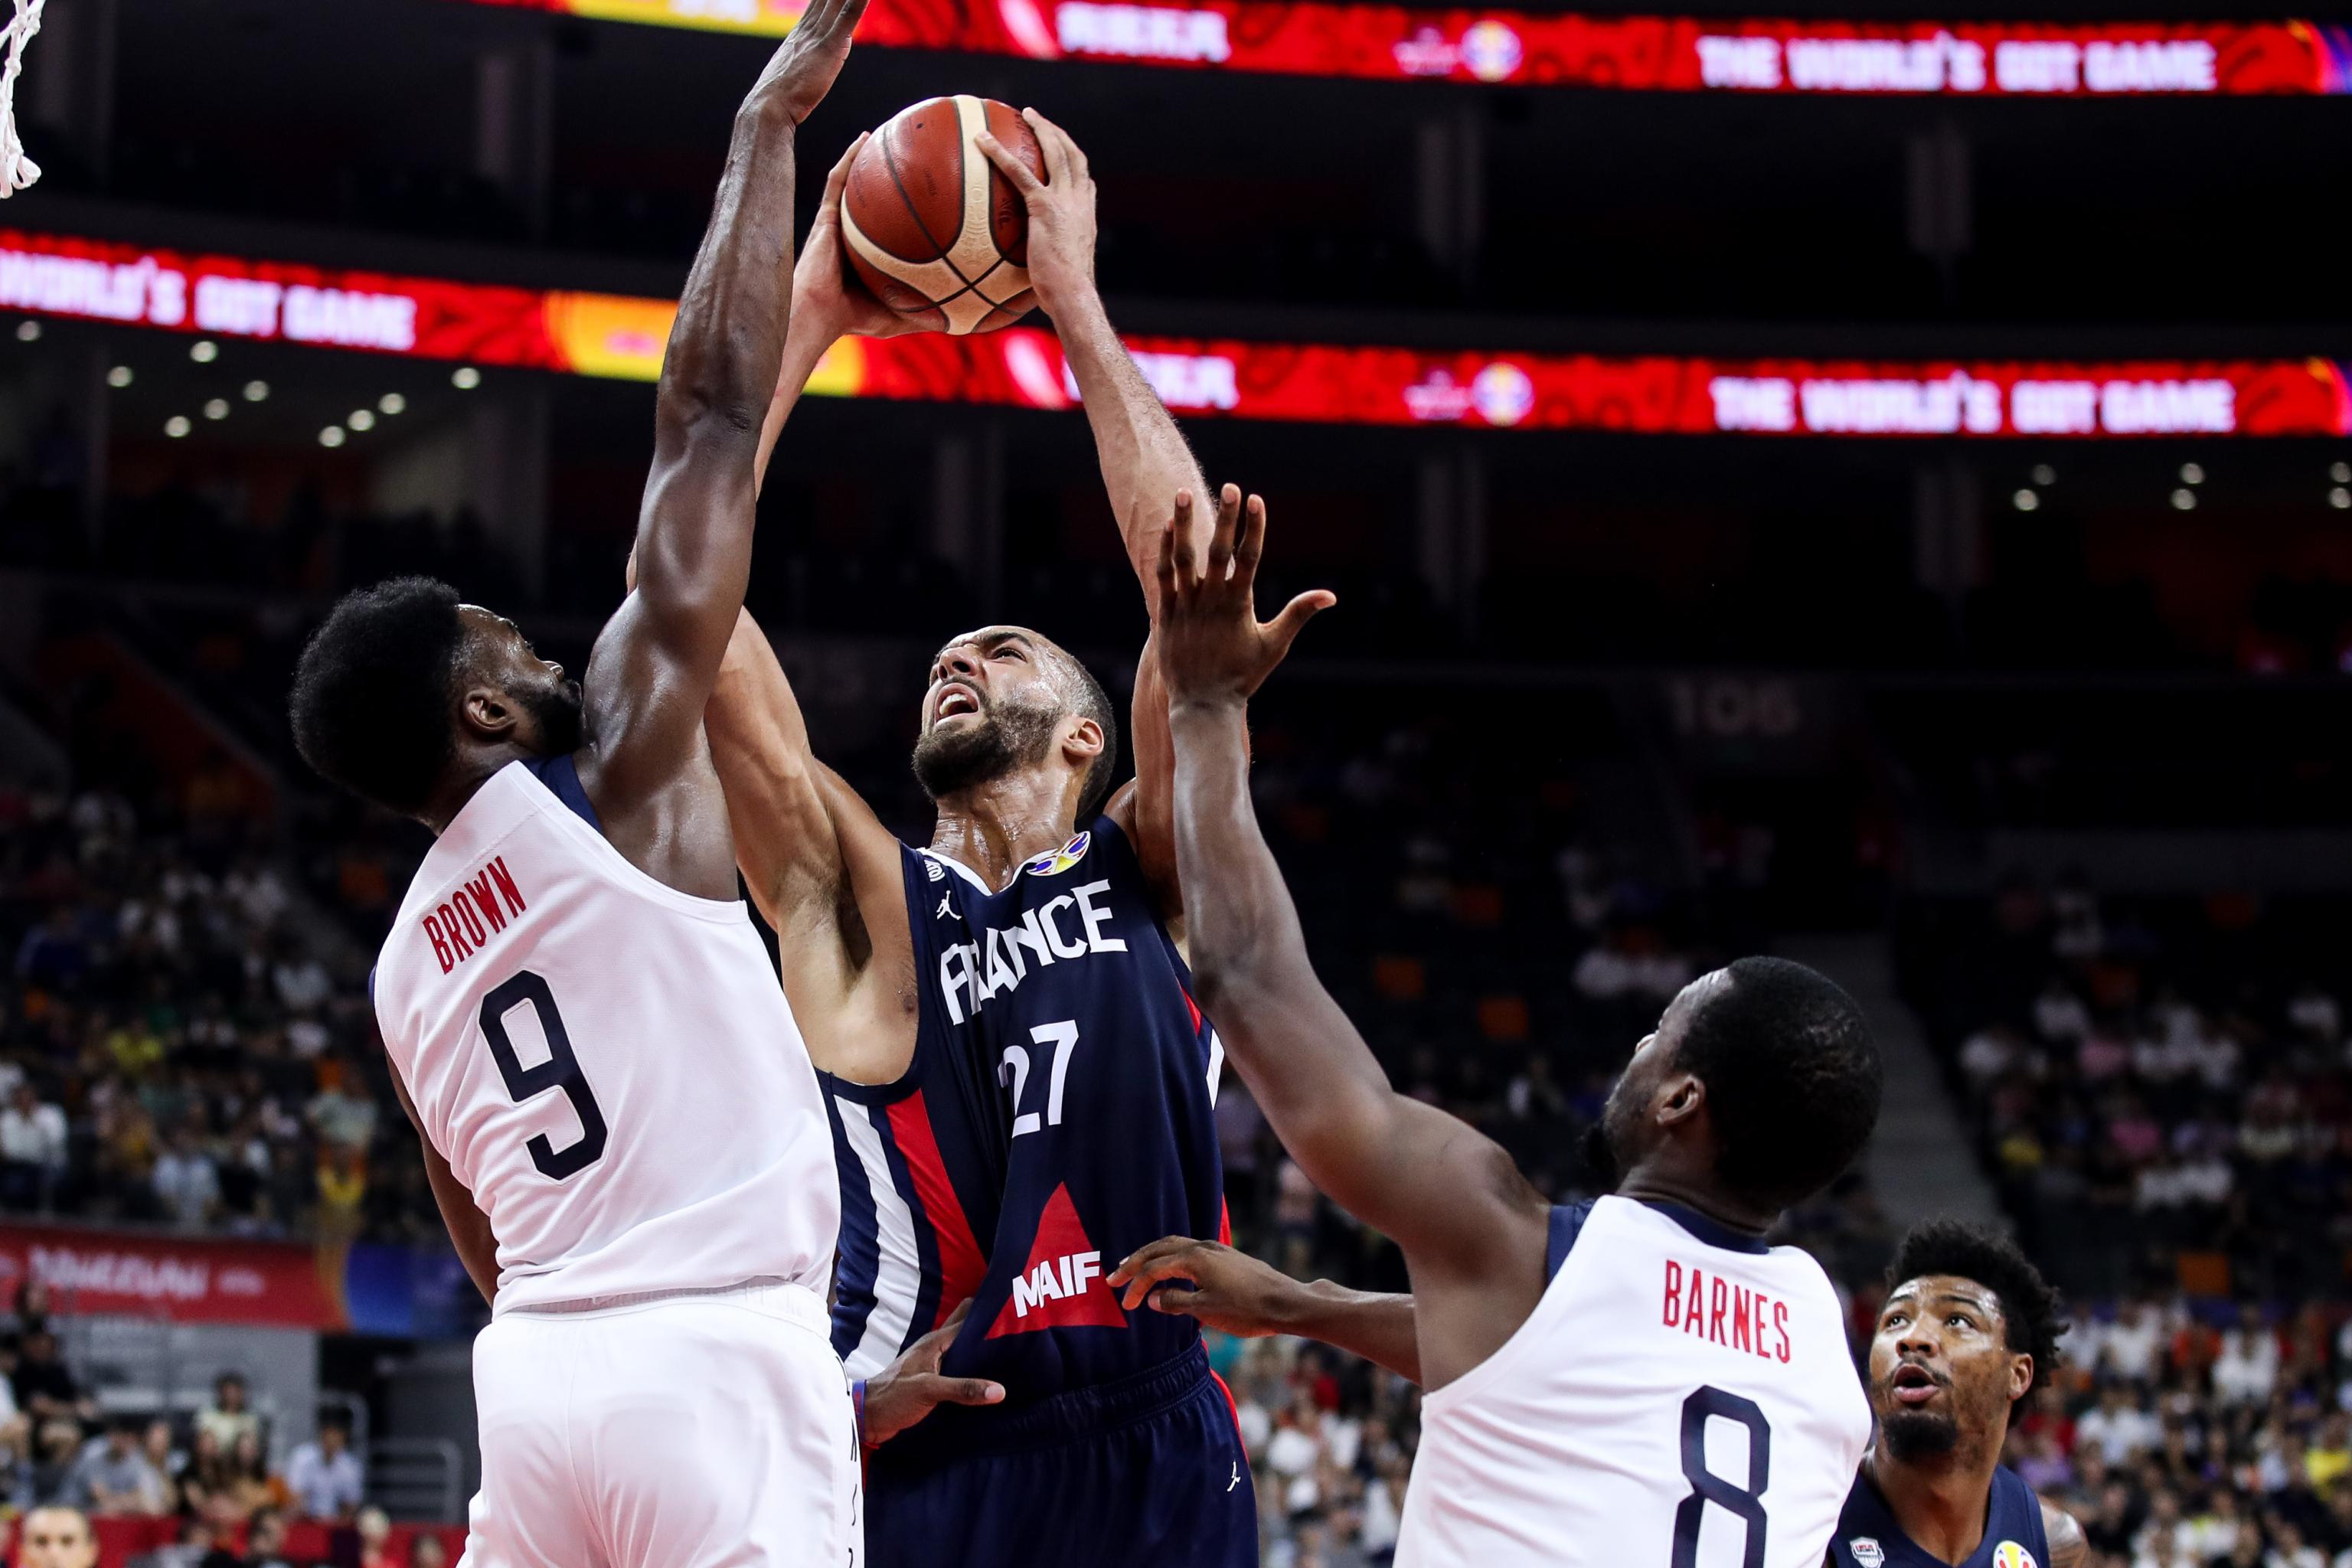 USA Basketball result at FIBA World Cup disappointing, not surprising